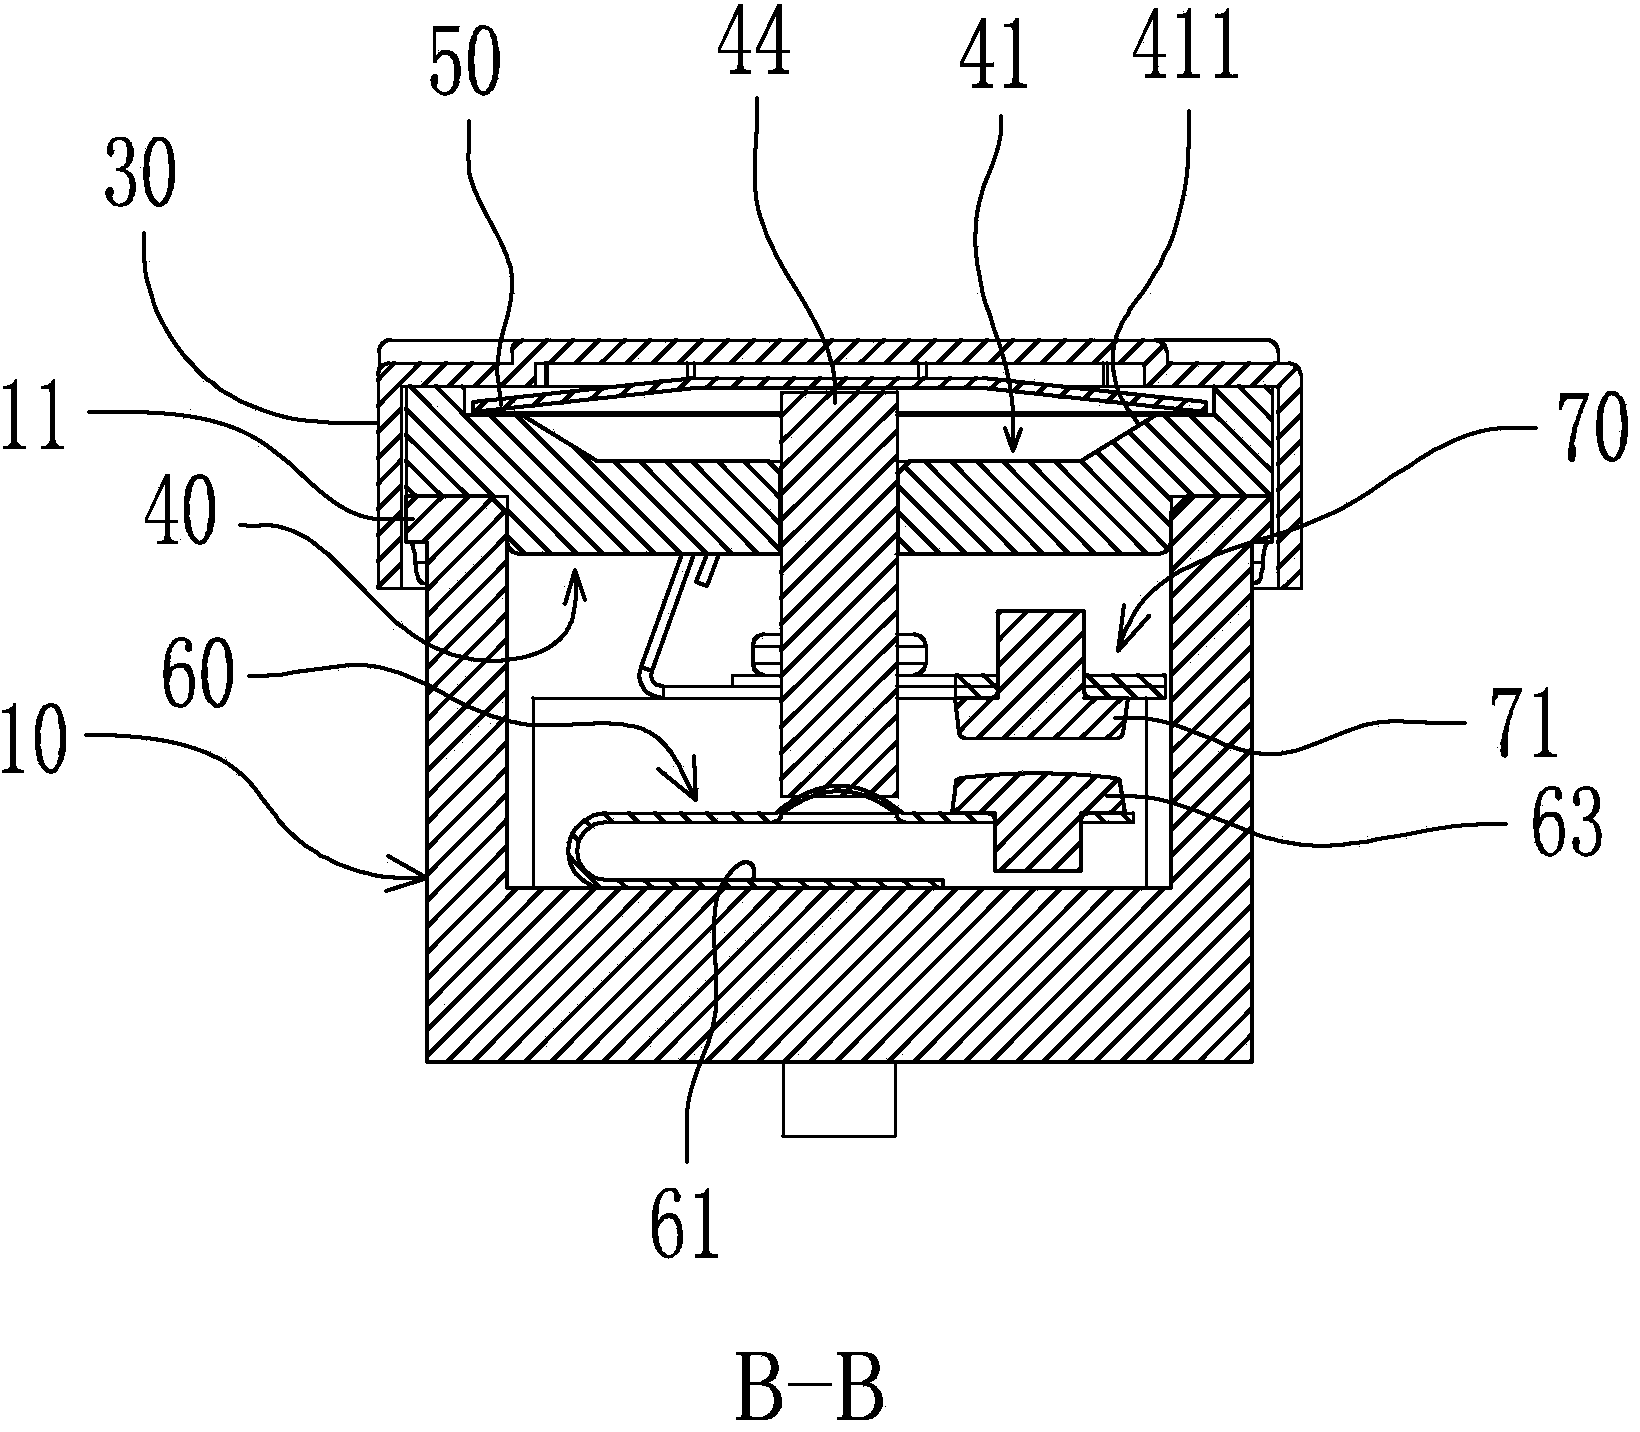 Spring-type power failure restoration temperature control switch capable of controlling two kinds of circuits